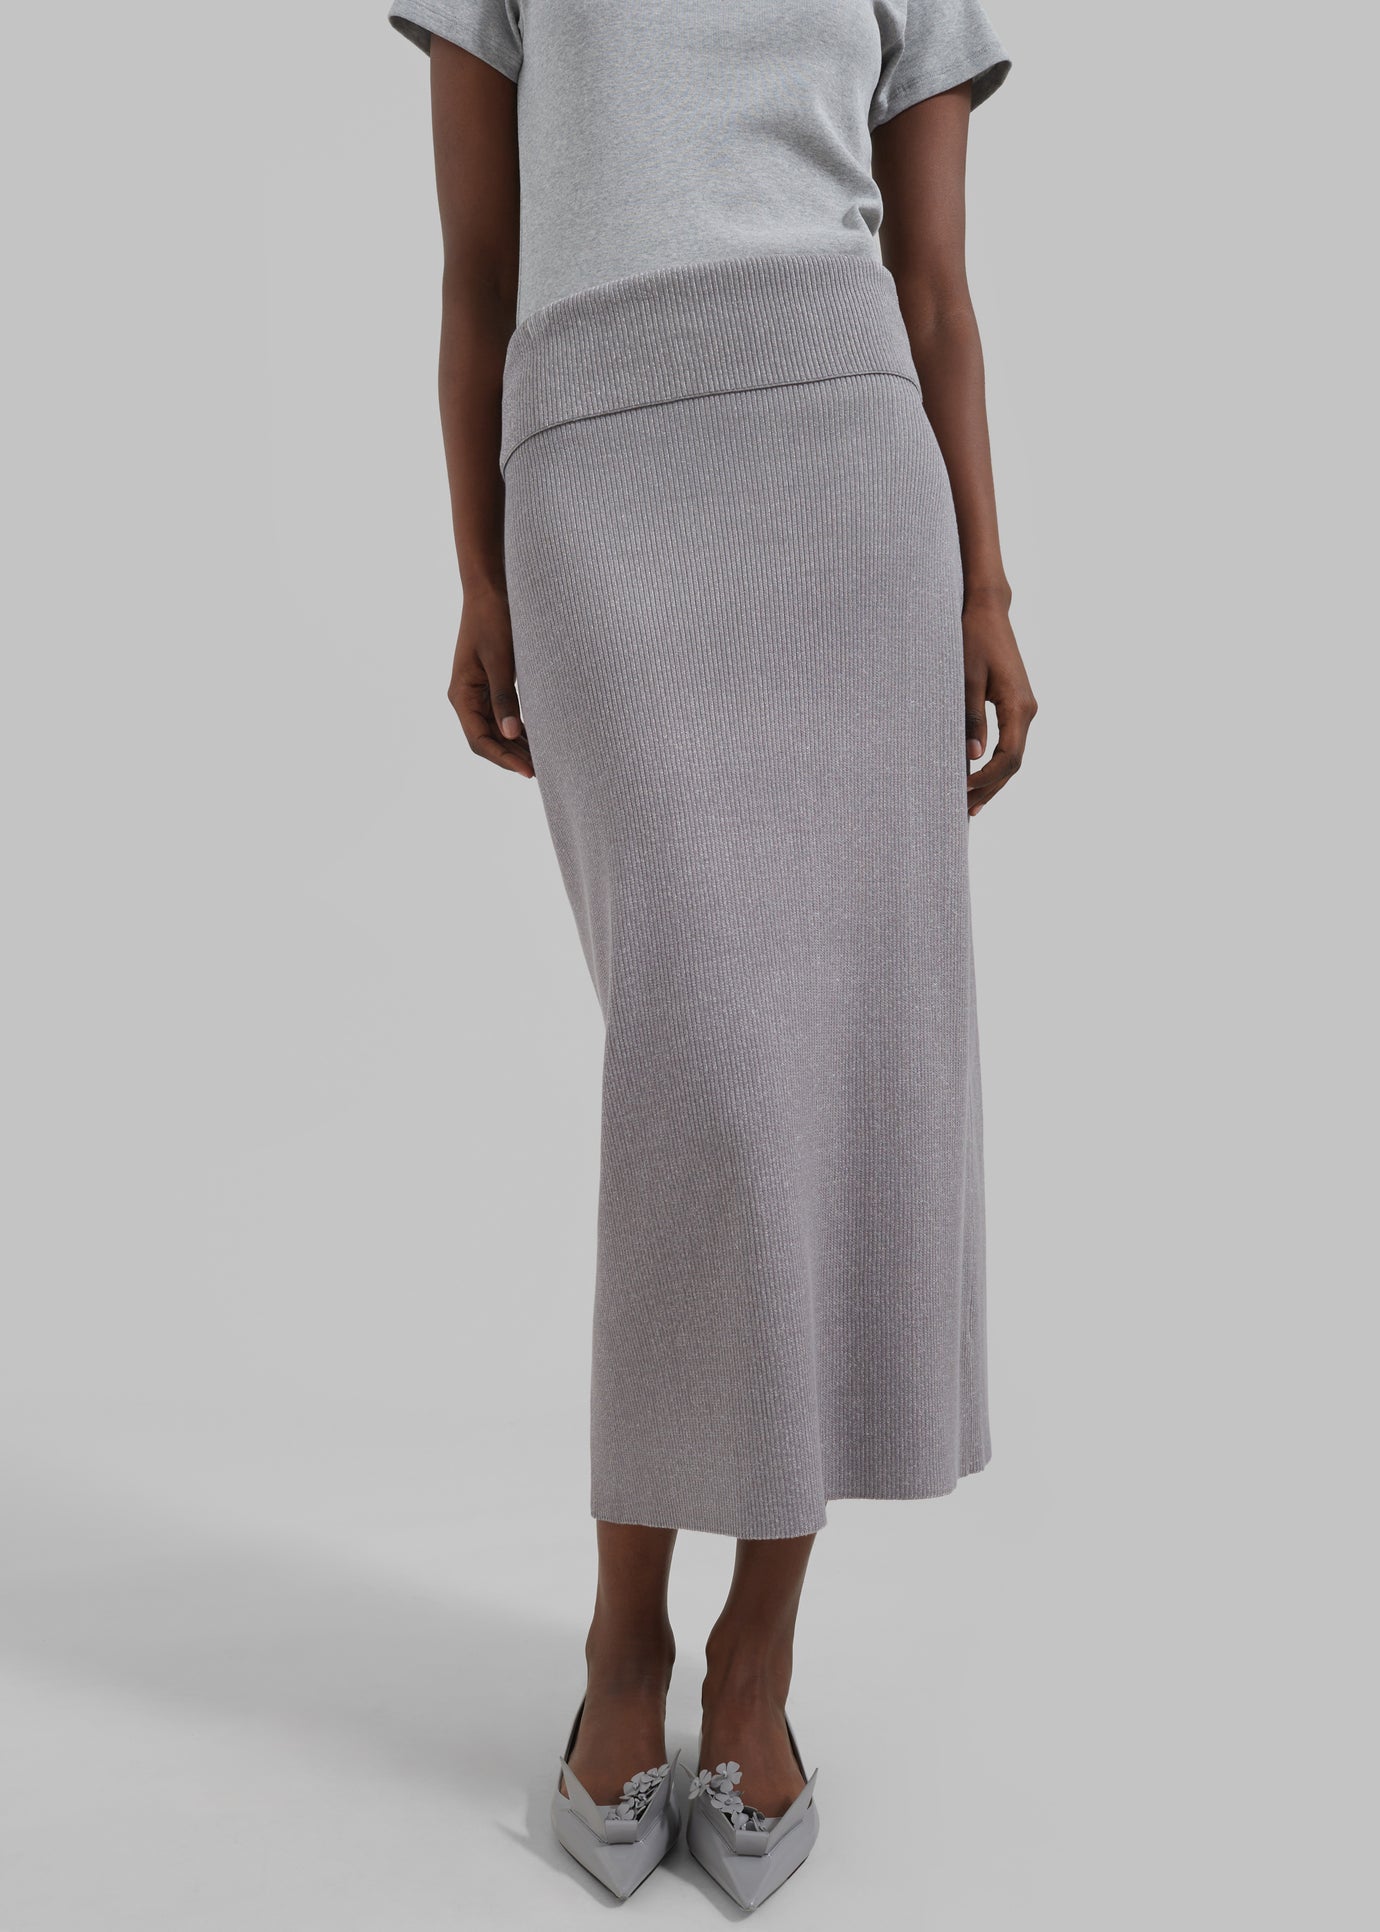 Proenza Schouler White Label Willow Skirt In Plaited Rib Knits - Fog/Off White